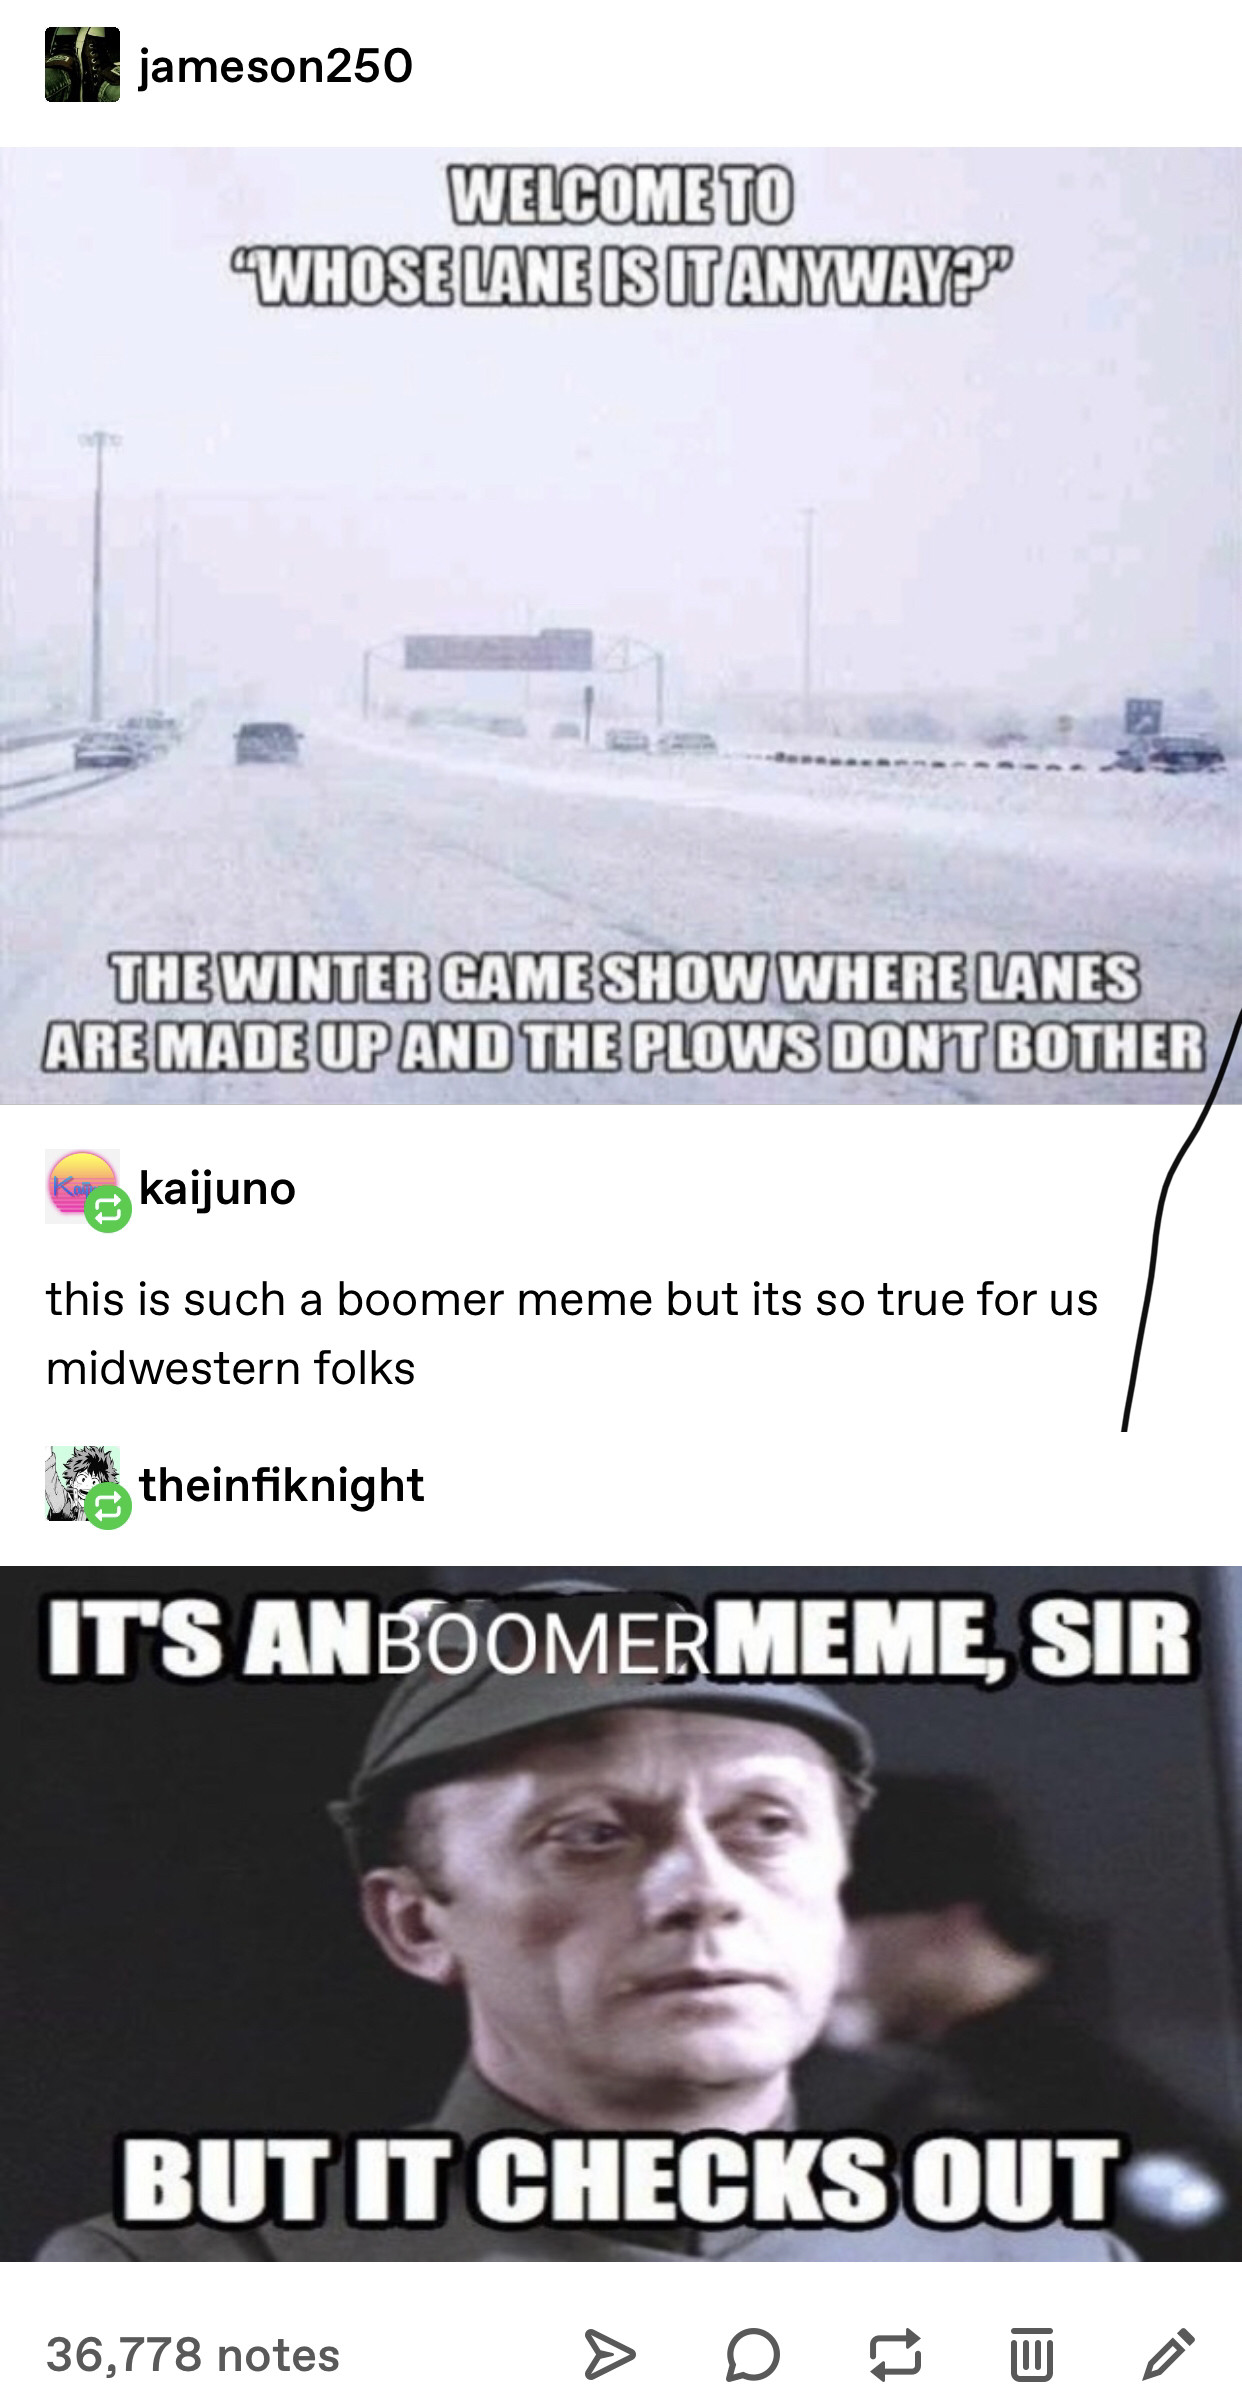 poster - Ft jameson250 Welcome To Whose Lane Is It Anyway? The Winter Game Show Where Lanes Are Made Up And The Plows Dont Bother Kokaijuno this is such a boomer meme but its so true for us midwestern folks theinfiknight It'S Anboomermeme, Sir But It Chec